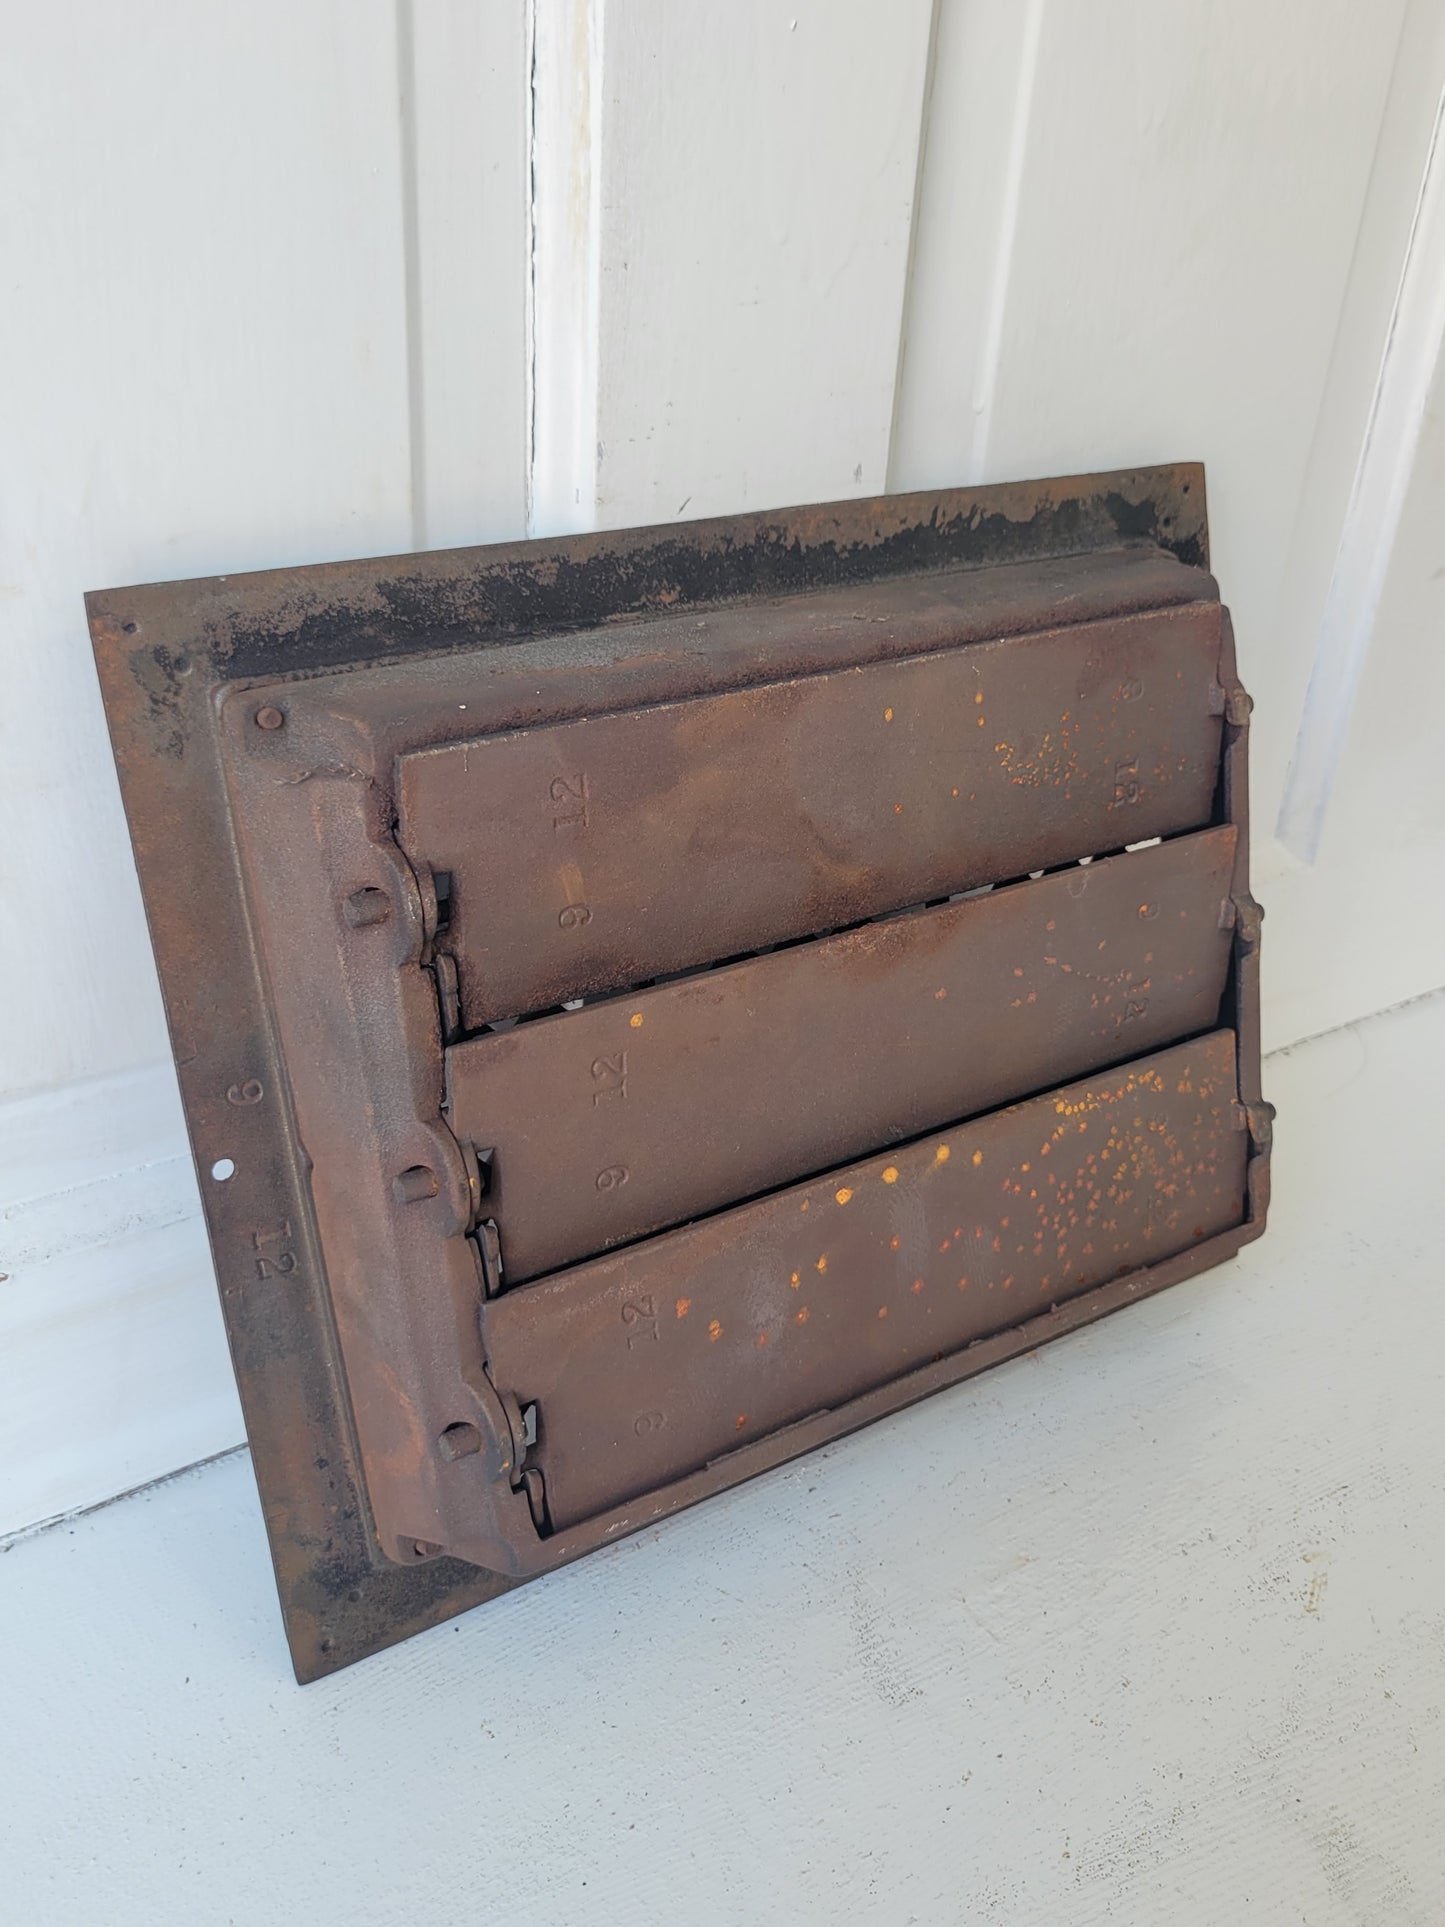 11 x 14 Antique Cast Iron Working Vent Cover, Floor Register Cover with Dampers #081901